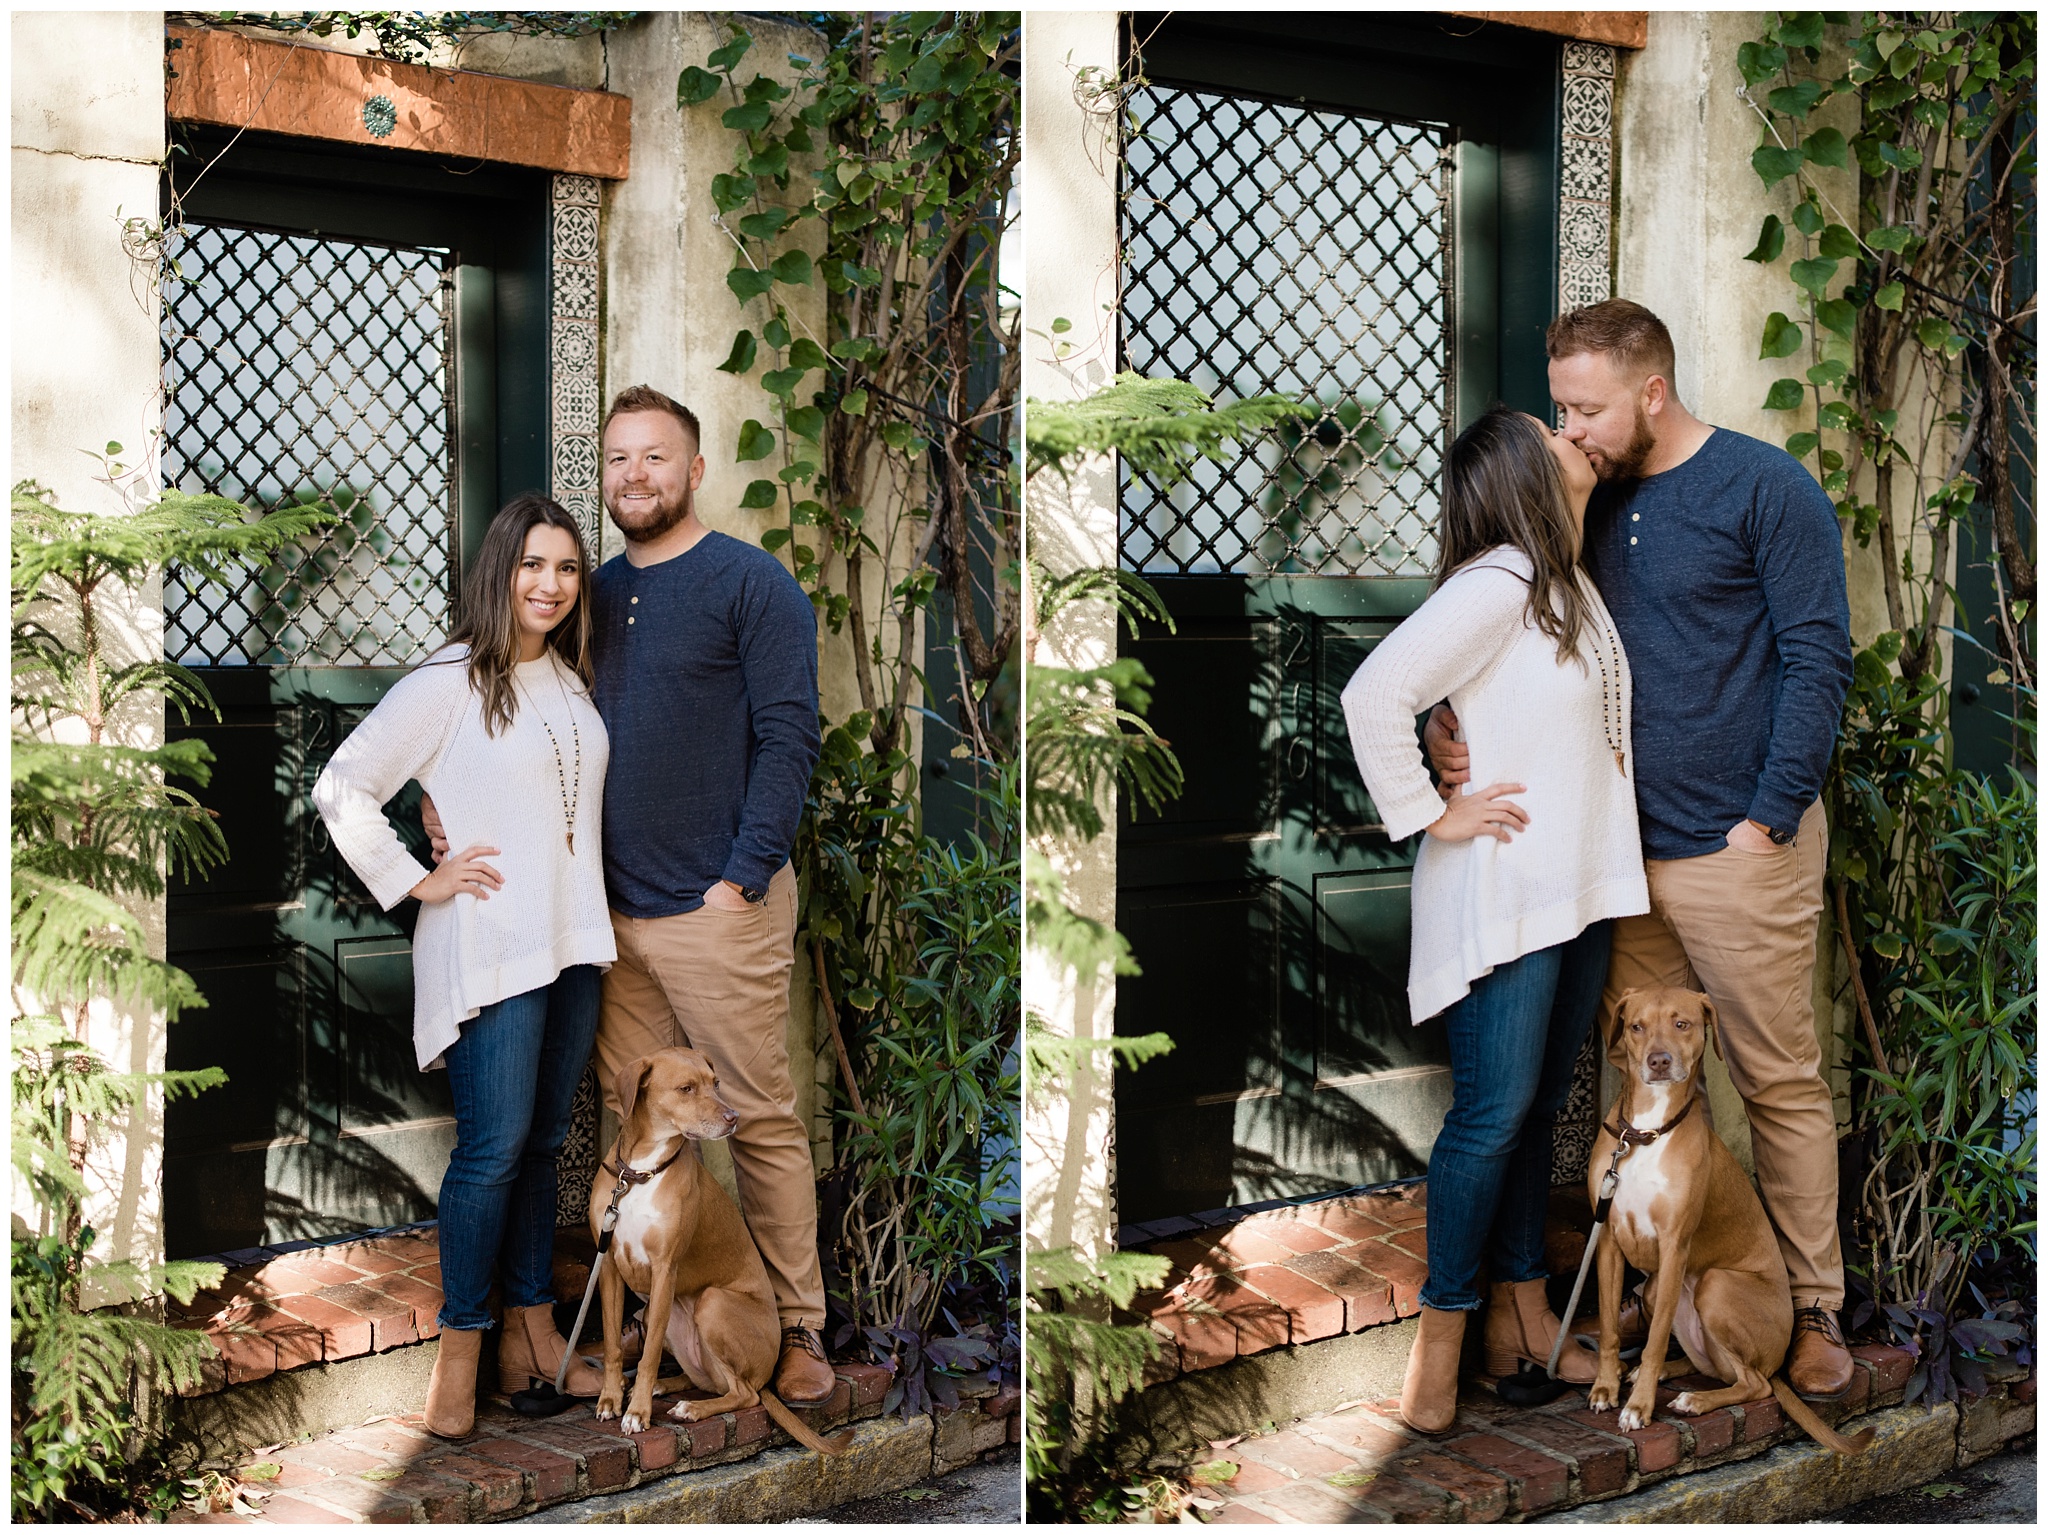 Henna and Gavin posing for photos at engagement session with dog